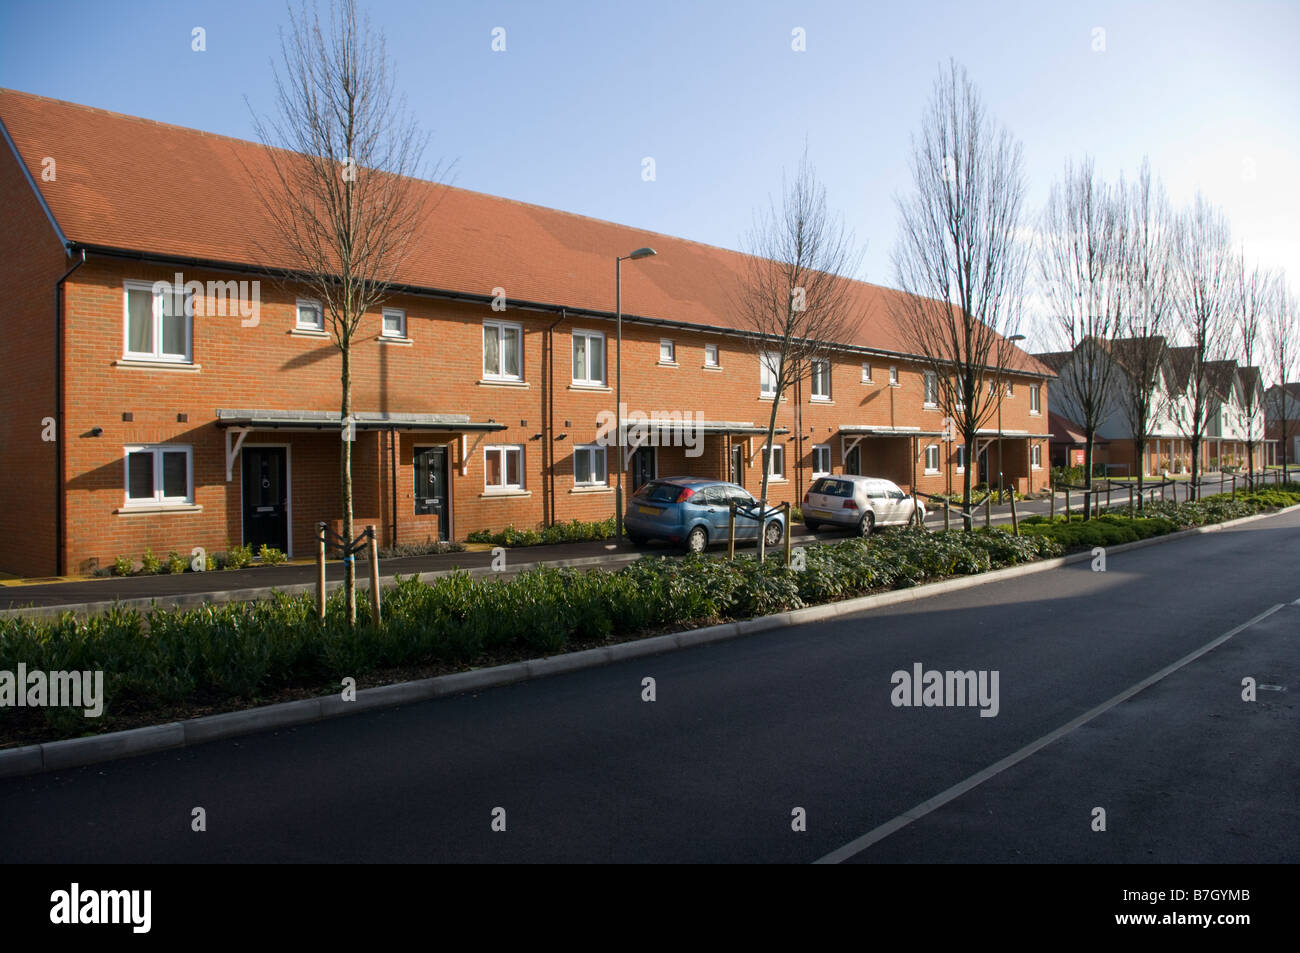 Newly Constructed Row Terrace Terraced Houses Homes Buildings Stock Photo